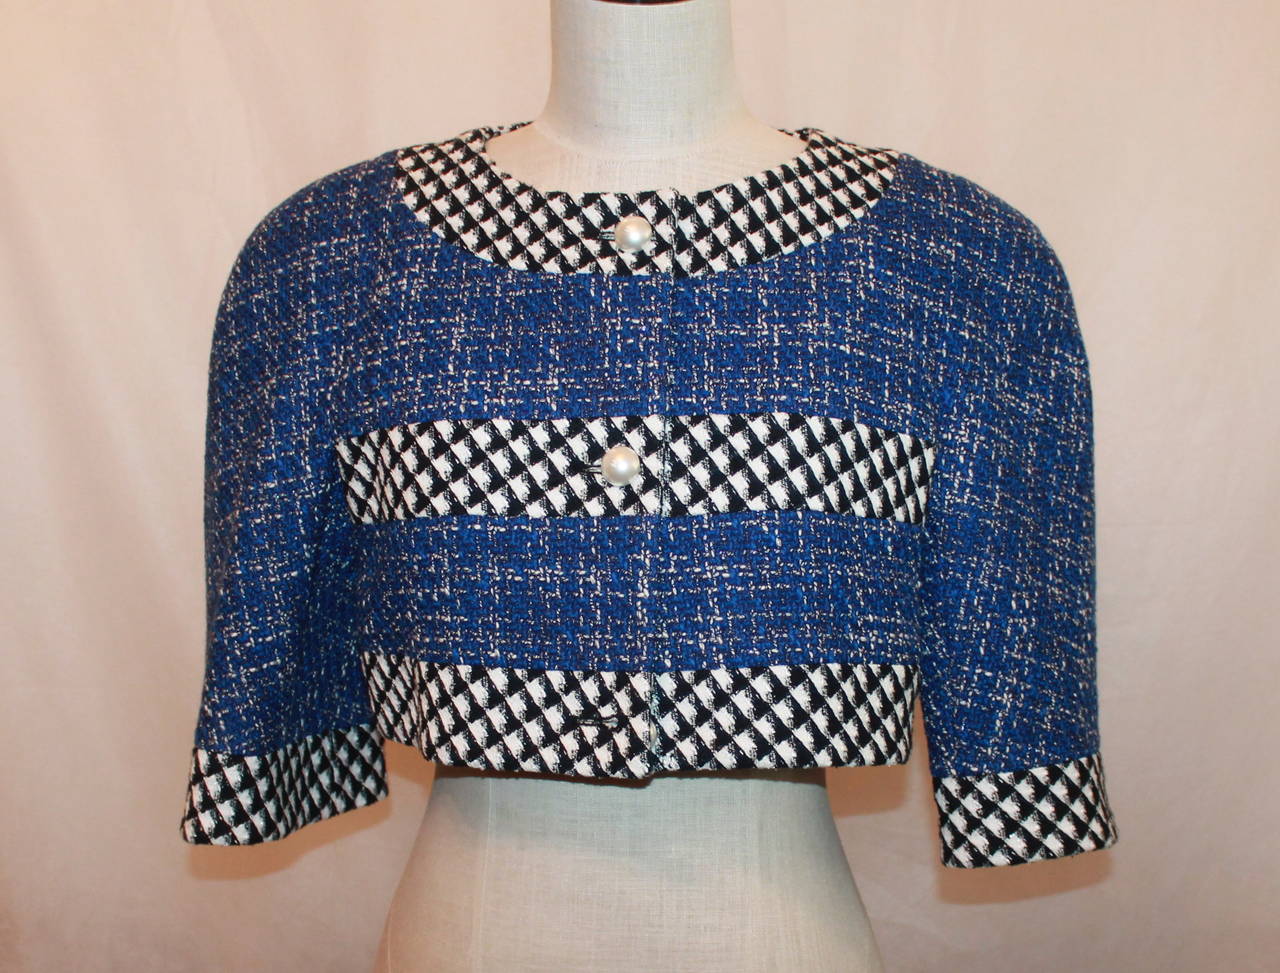 Chanel Blue, Black & White Tweed Crop Bolero with Pearl Buttons - 40. This piece is in excellent condition and is from 2010-2015. It is a wool and hound's tooth pattern. The pearl buttons have a 